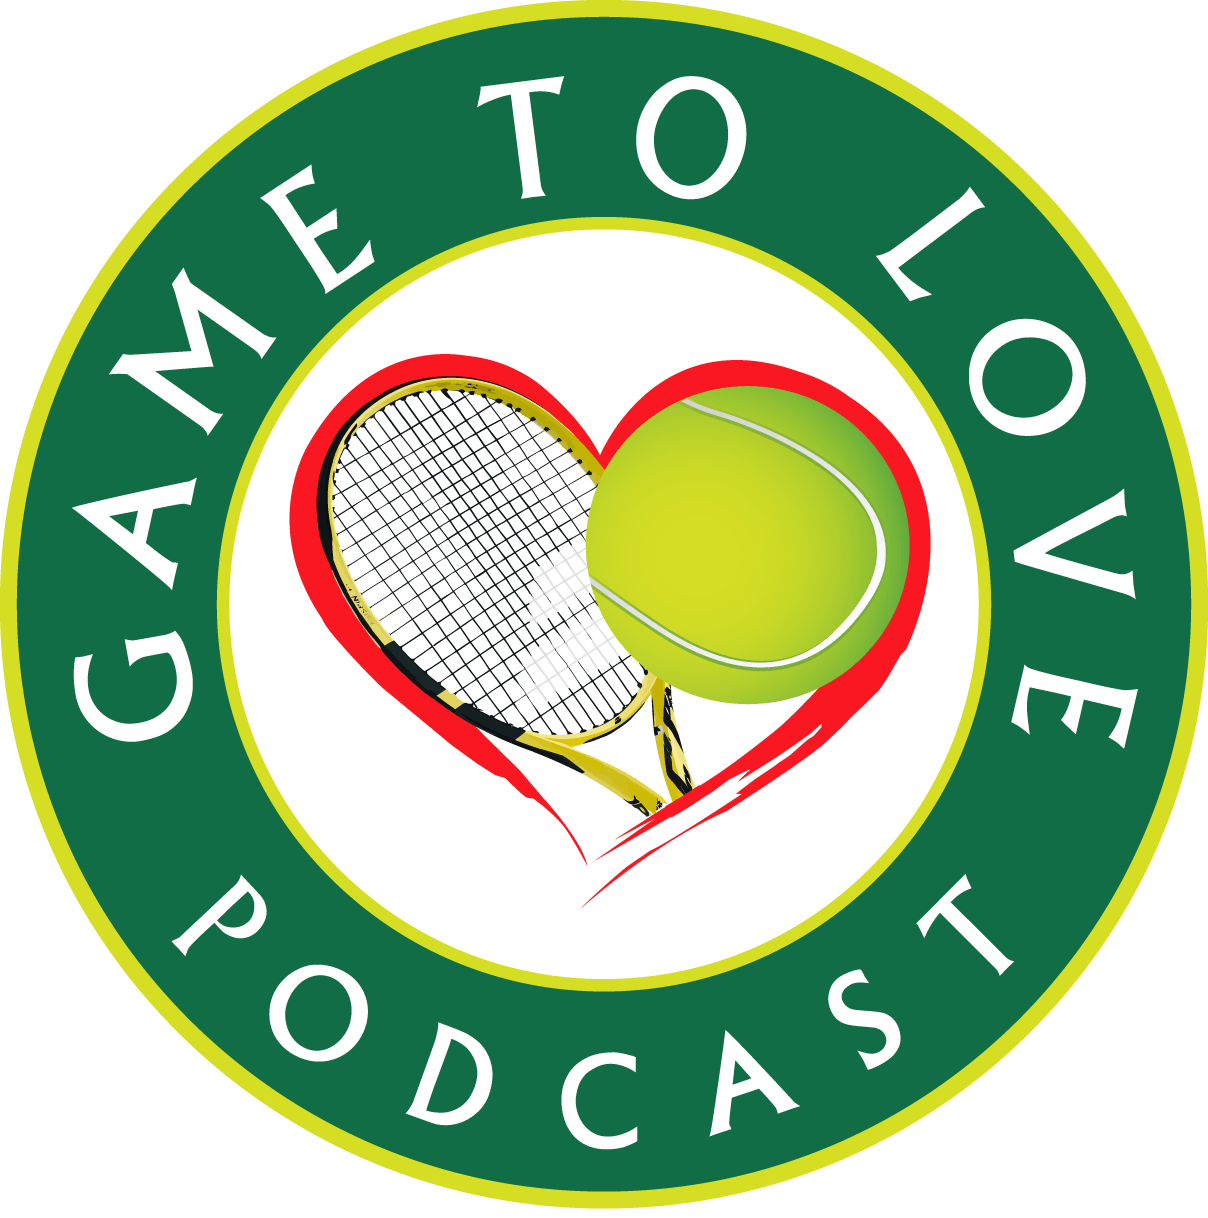 Wimbledon 2022 | Women's Draw Preview & Predictions | GTL Tennis Podcast #369